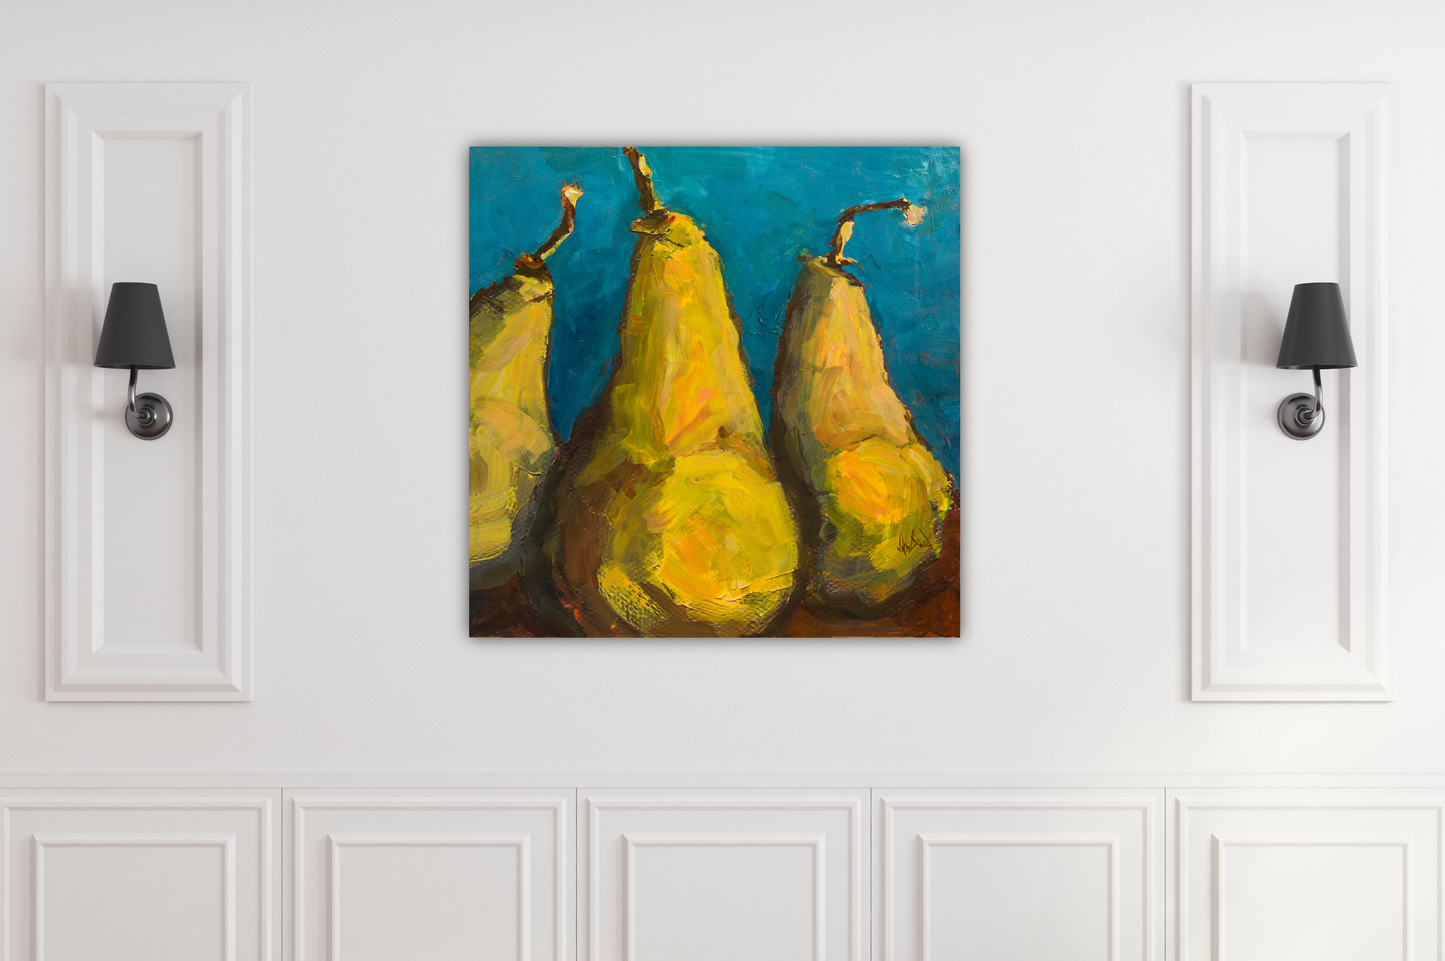 Pears with Teal Glossy Poster Print